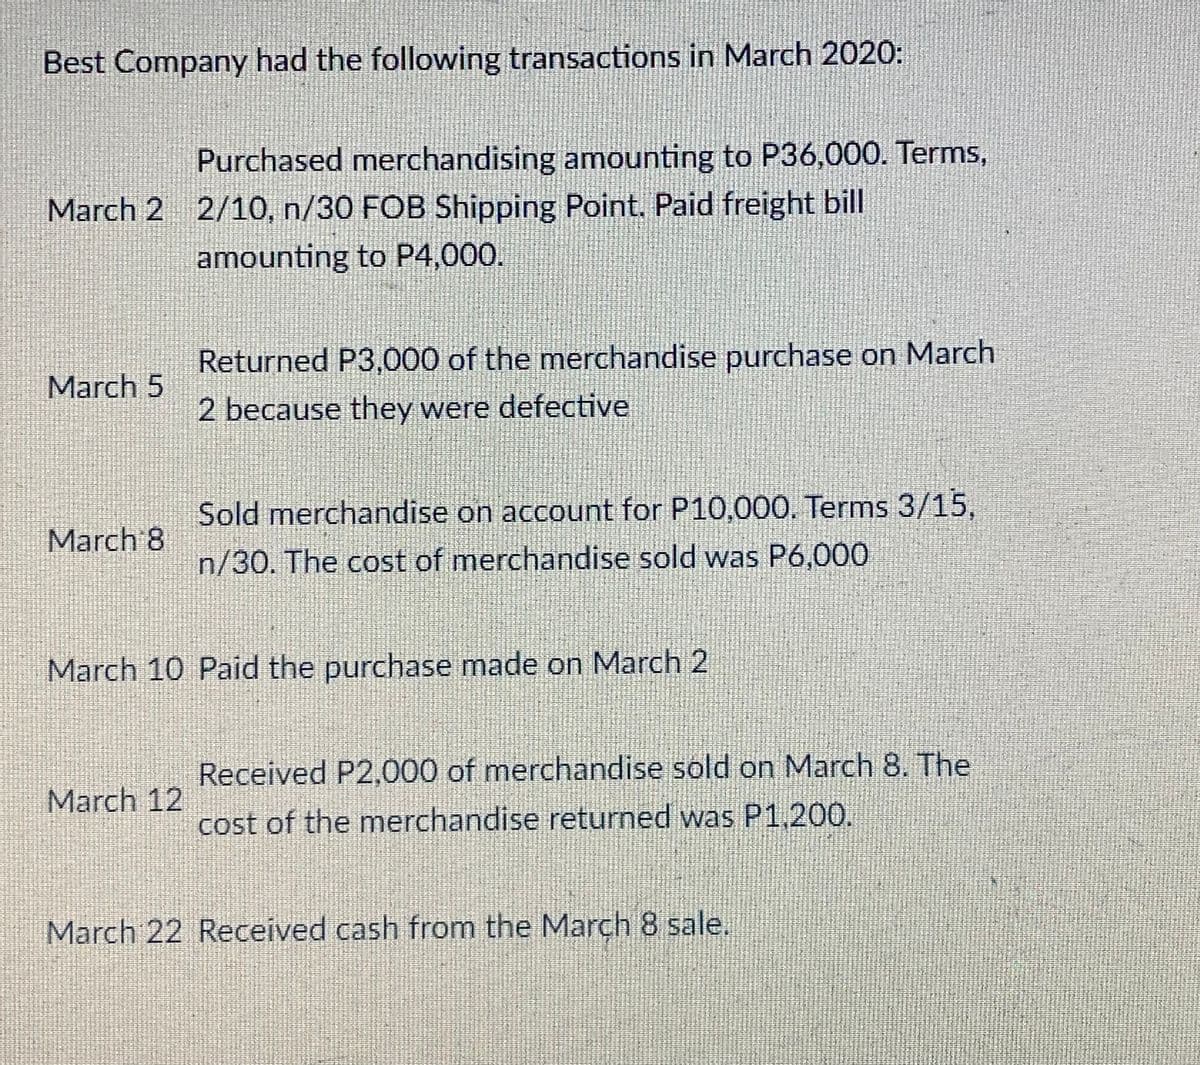 Best Company had the following transactions in March 2020:
Purchased merchandising amounting to P36,000. Terms,
March 2 2/10, n/30 FOB Shipping Point. Paid freight bill
amounting to P4,000.
Returned P3,000 of the merchandise purchase on March
March 5
2 because they were defective
Sold merchandise on account for P10,000, Terms 3/15,
March 8
n/30. The cost of merchandise sold was P6,000
March 10 Paid the purchase made on March 2
Received P2,.000 of merchandise sold on March 8. The
March 12
cost of the merchandise returned was P1.200.
March 22 Received cash from the March 8 sale.
